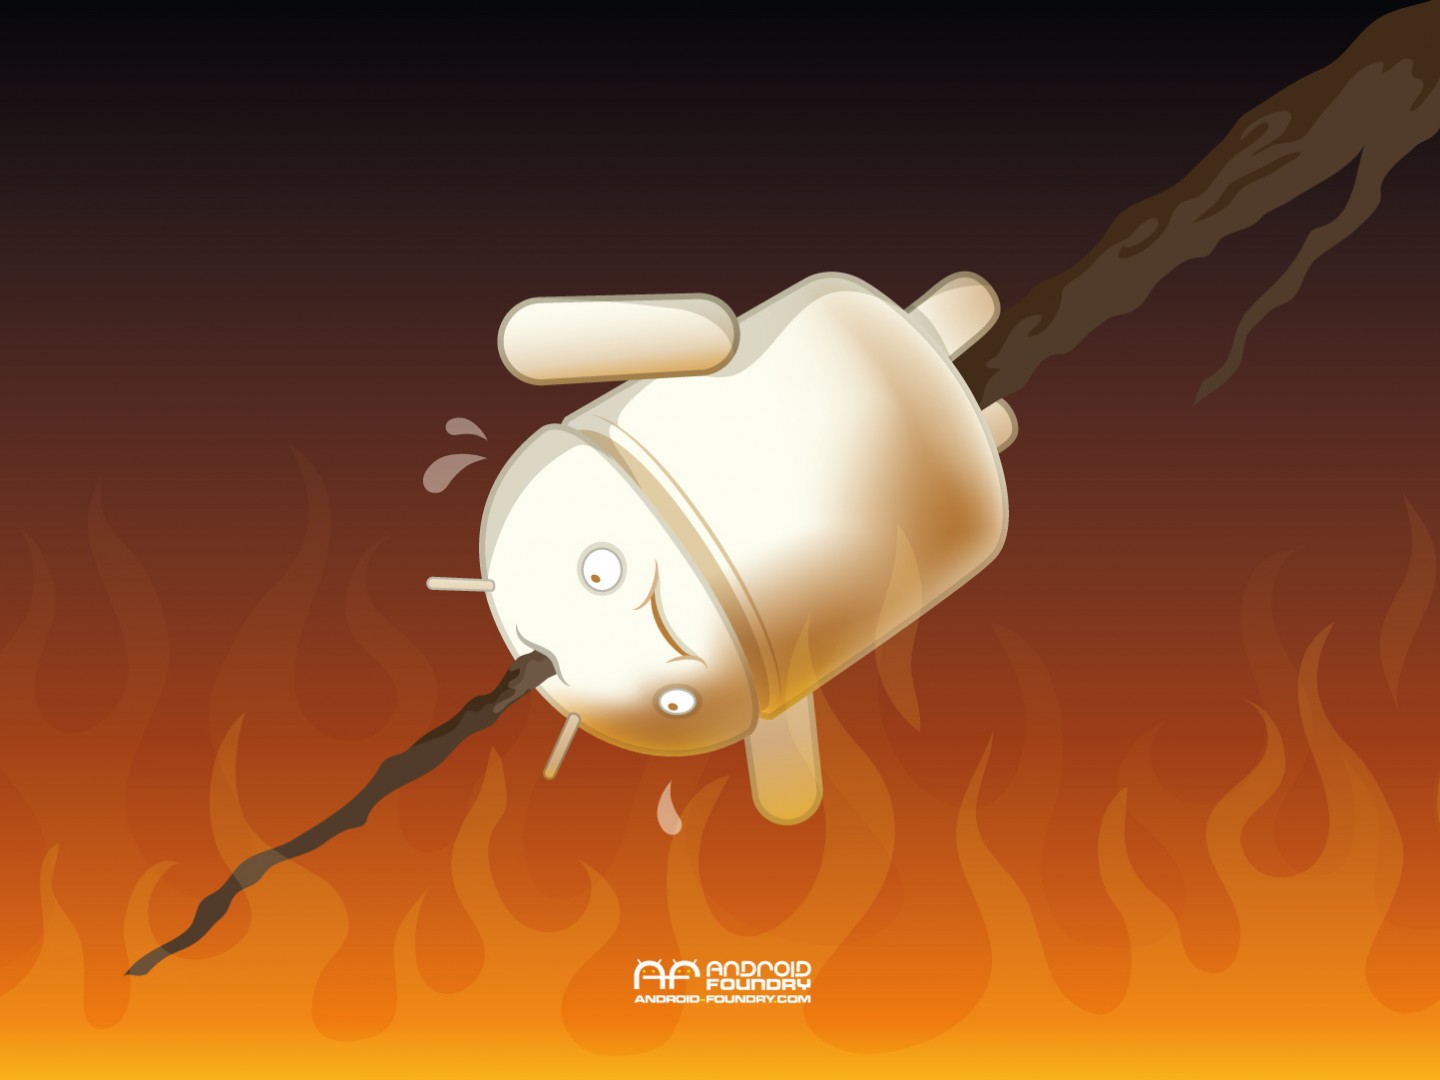 Wallpaper : National Marshmallow Toasting Day! | Android Foundry